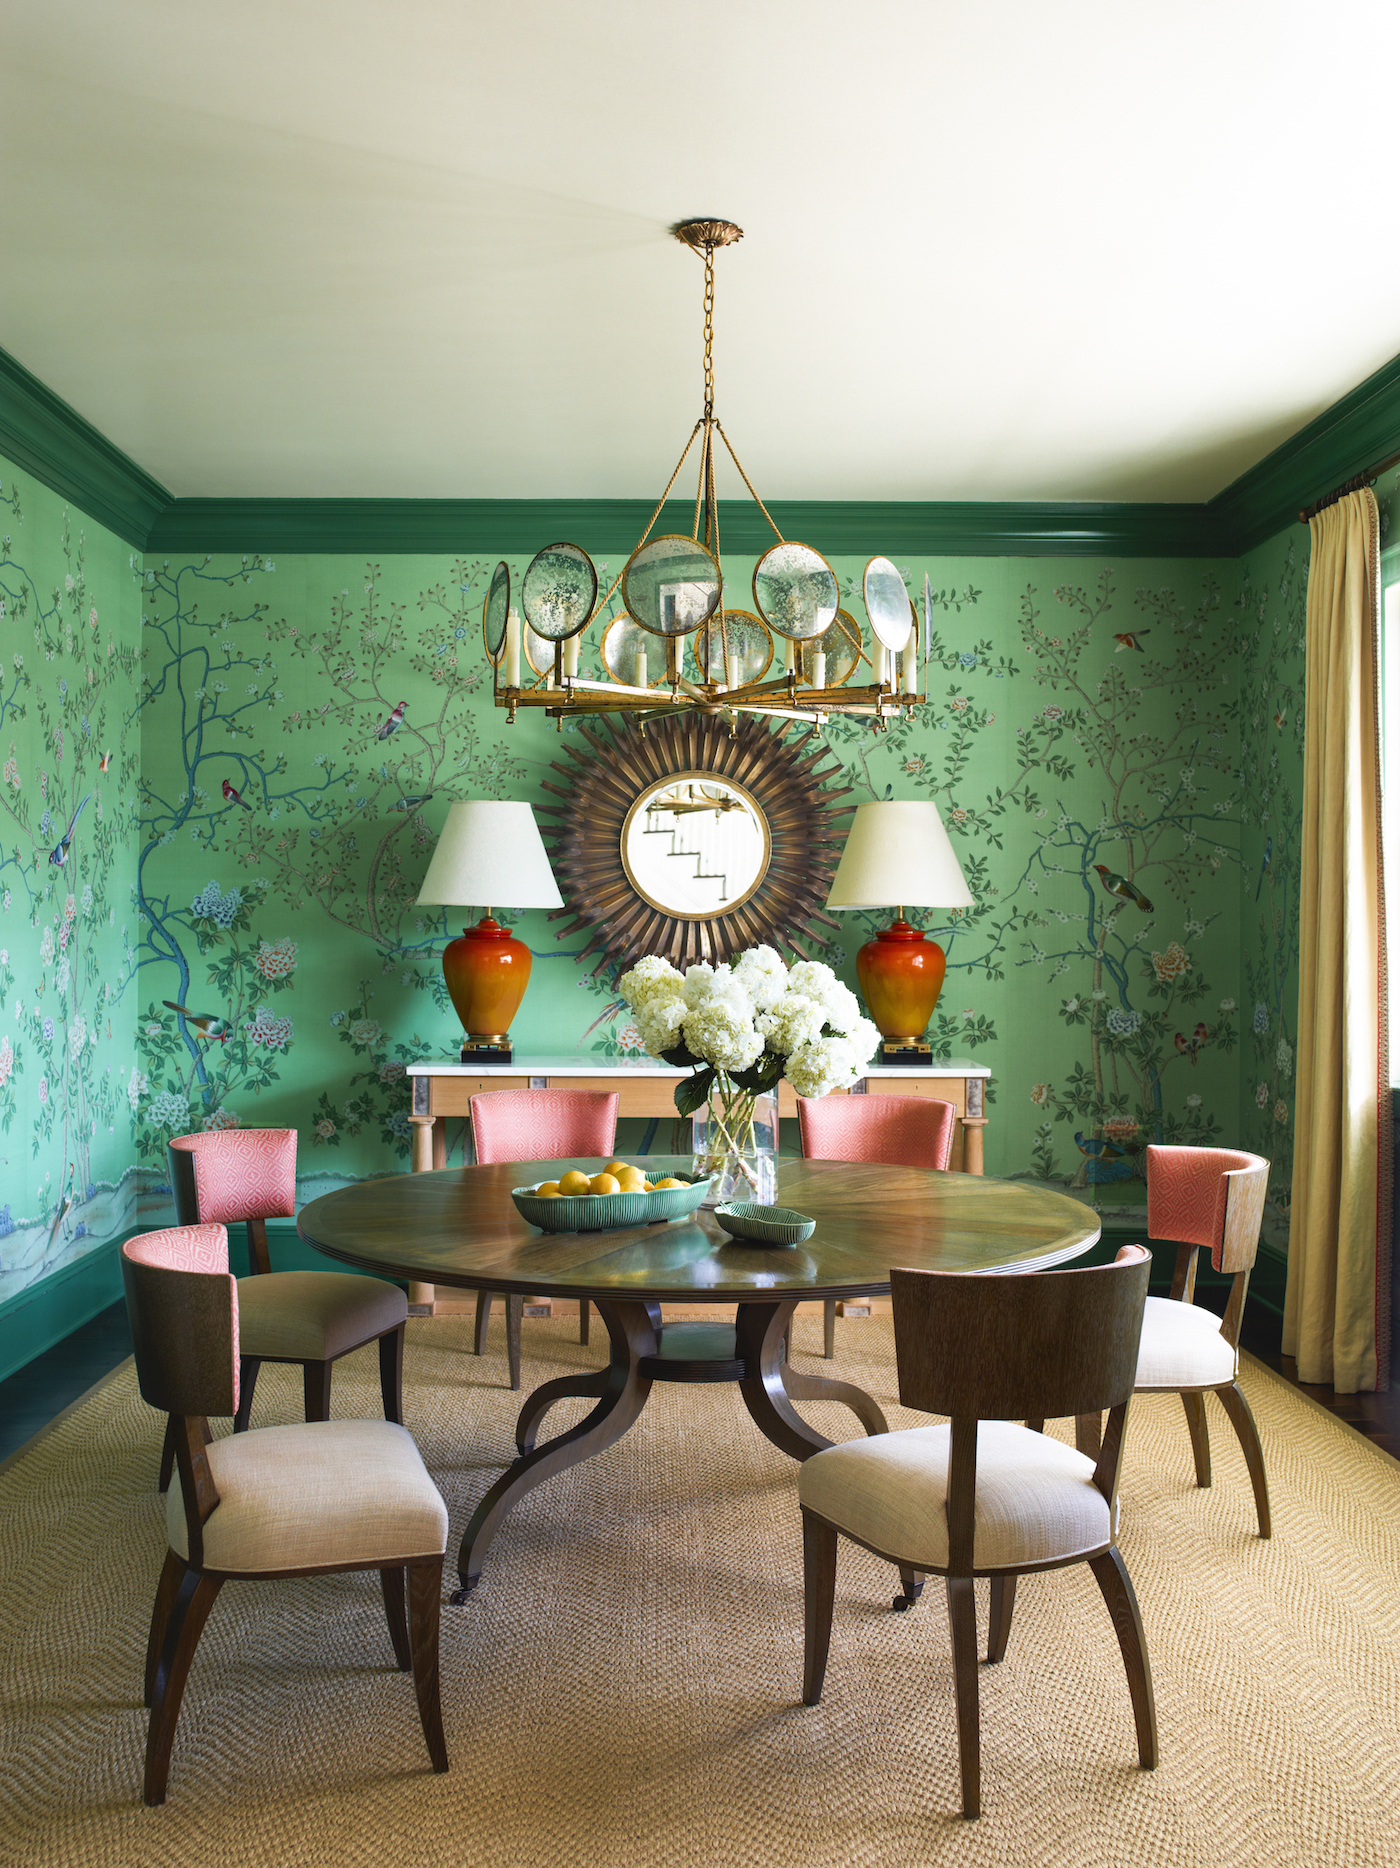 A Westchester house with interior with design by Gideon Mendelson in Effect Magazine